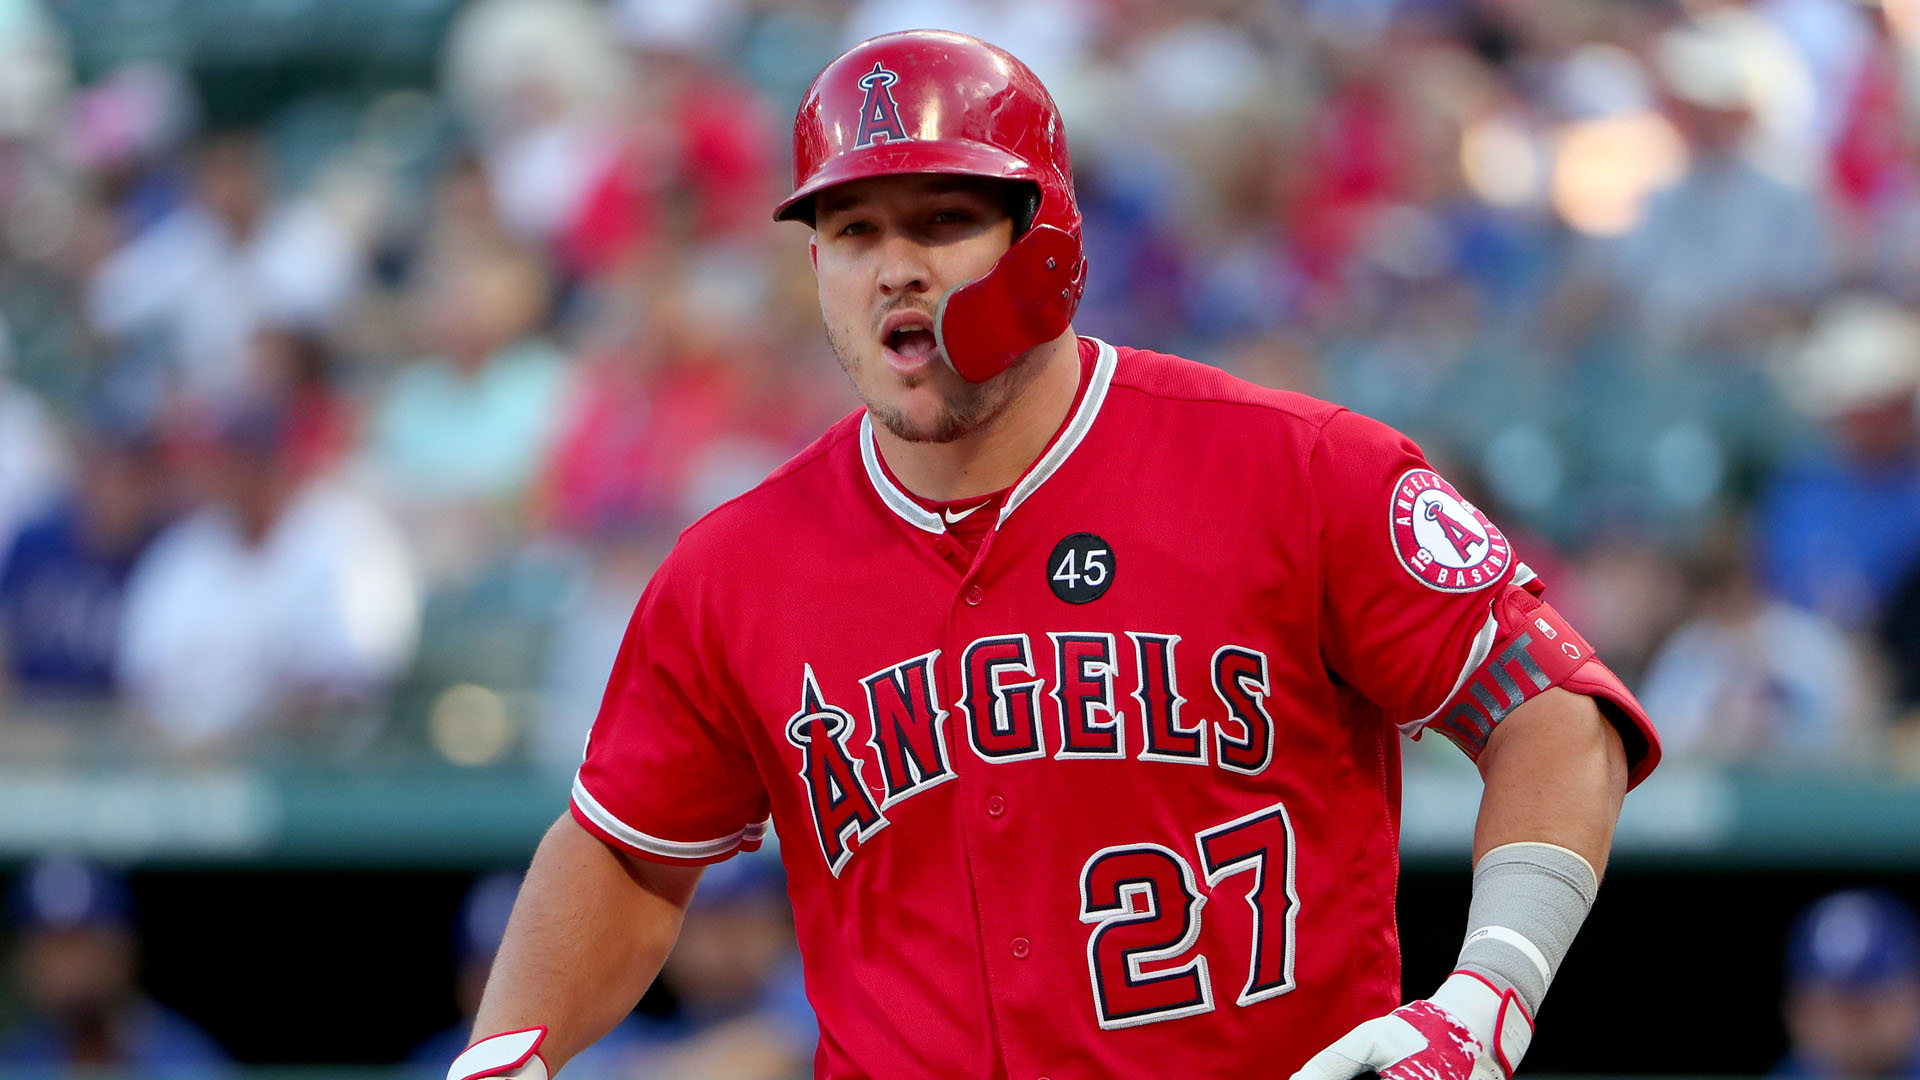 Trout, 27, has an AL-best 30 home runs as well as 75 RBIs while slashing .306/.456/.668 in building a case to win his third MVP award.